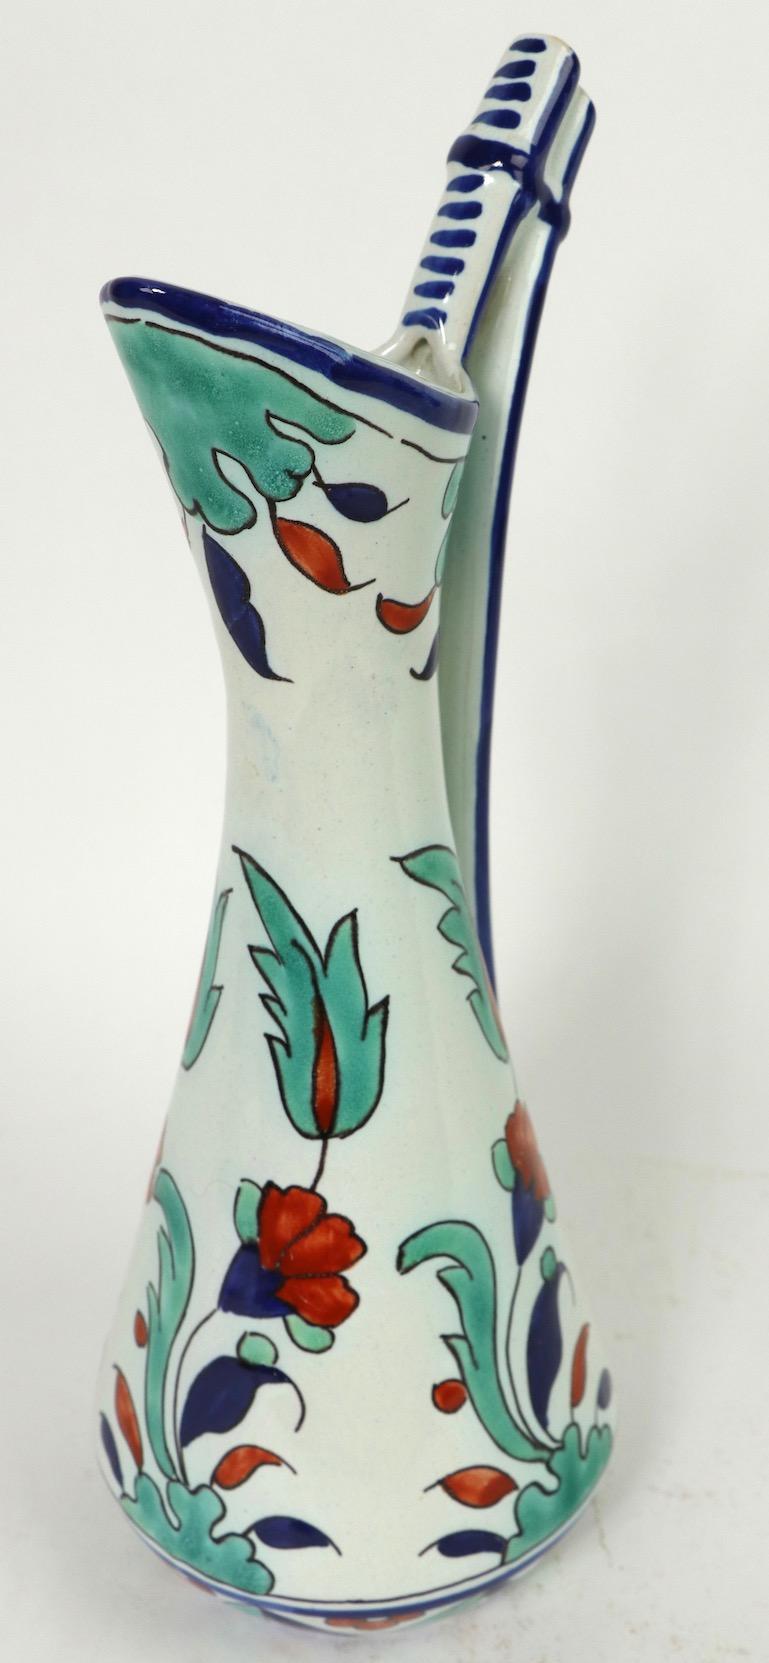 20th Century French Faience Ceramic Jug by Henri Delcourt